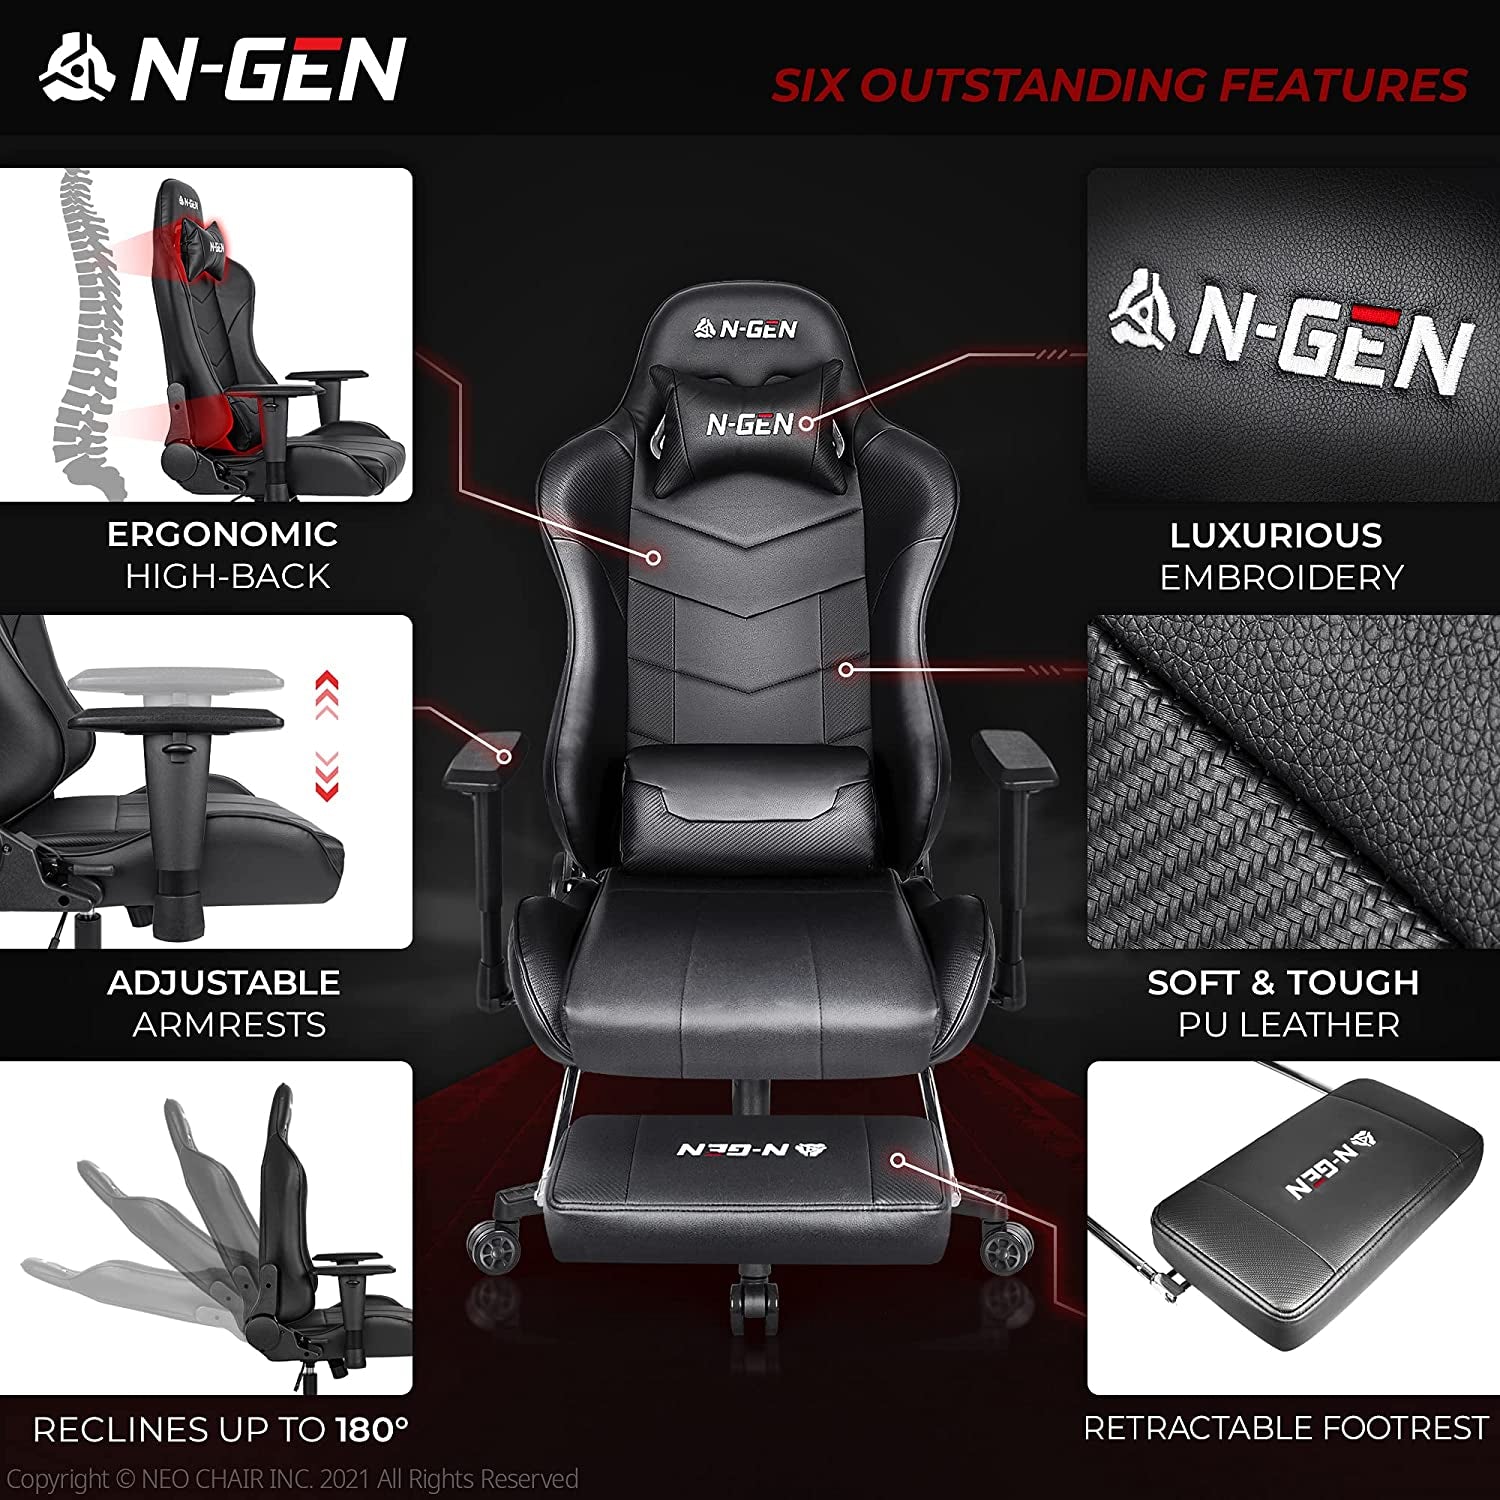 N-GEN Gaming Chair Computer Ergonomic Office Adjustable Lumbar Support Racing Style High Back Desk Swivel Executive Video Game PC Leather Height Reclining with Footrest (2. Black)